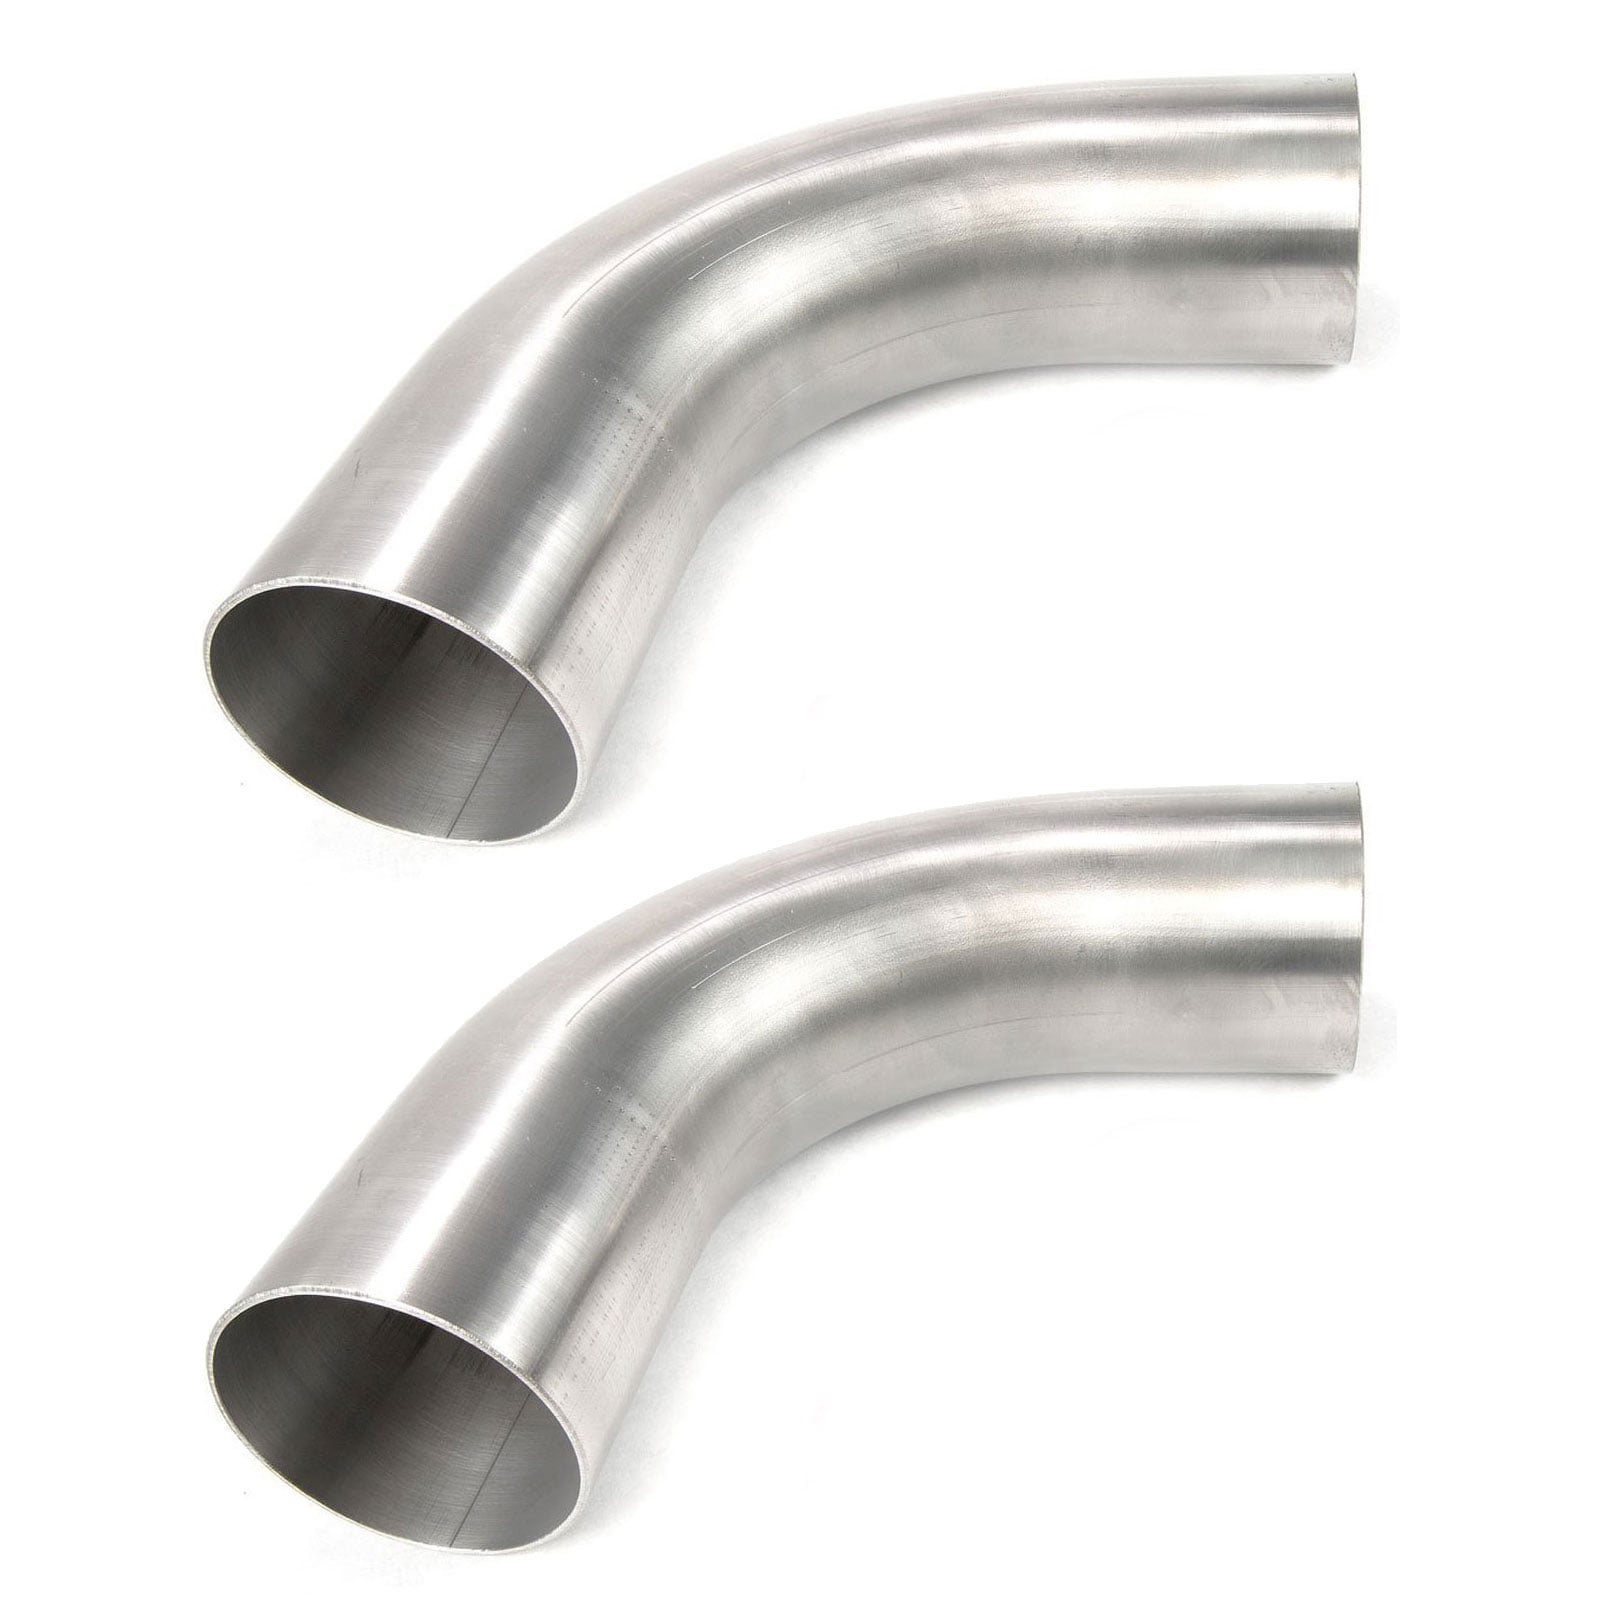 Squirrelly 1.75 304 Stainless Steel 4 Feet Straight Pipe Tubing Exhaust Bend